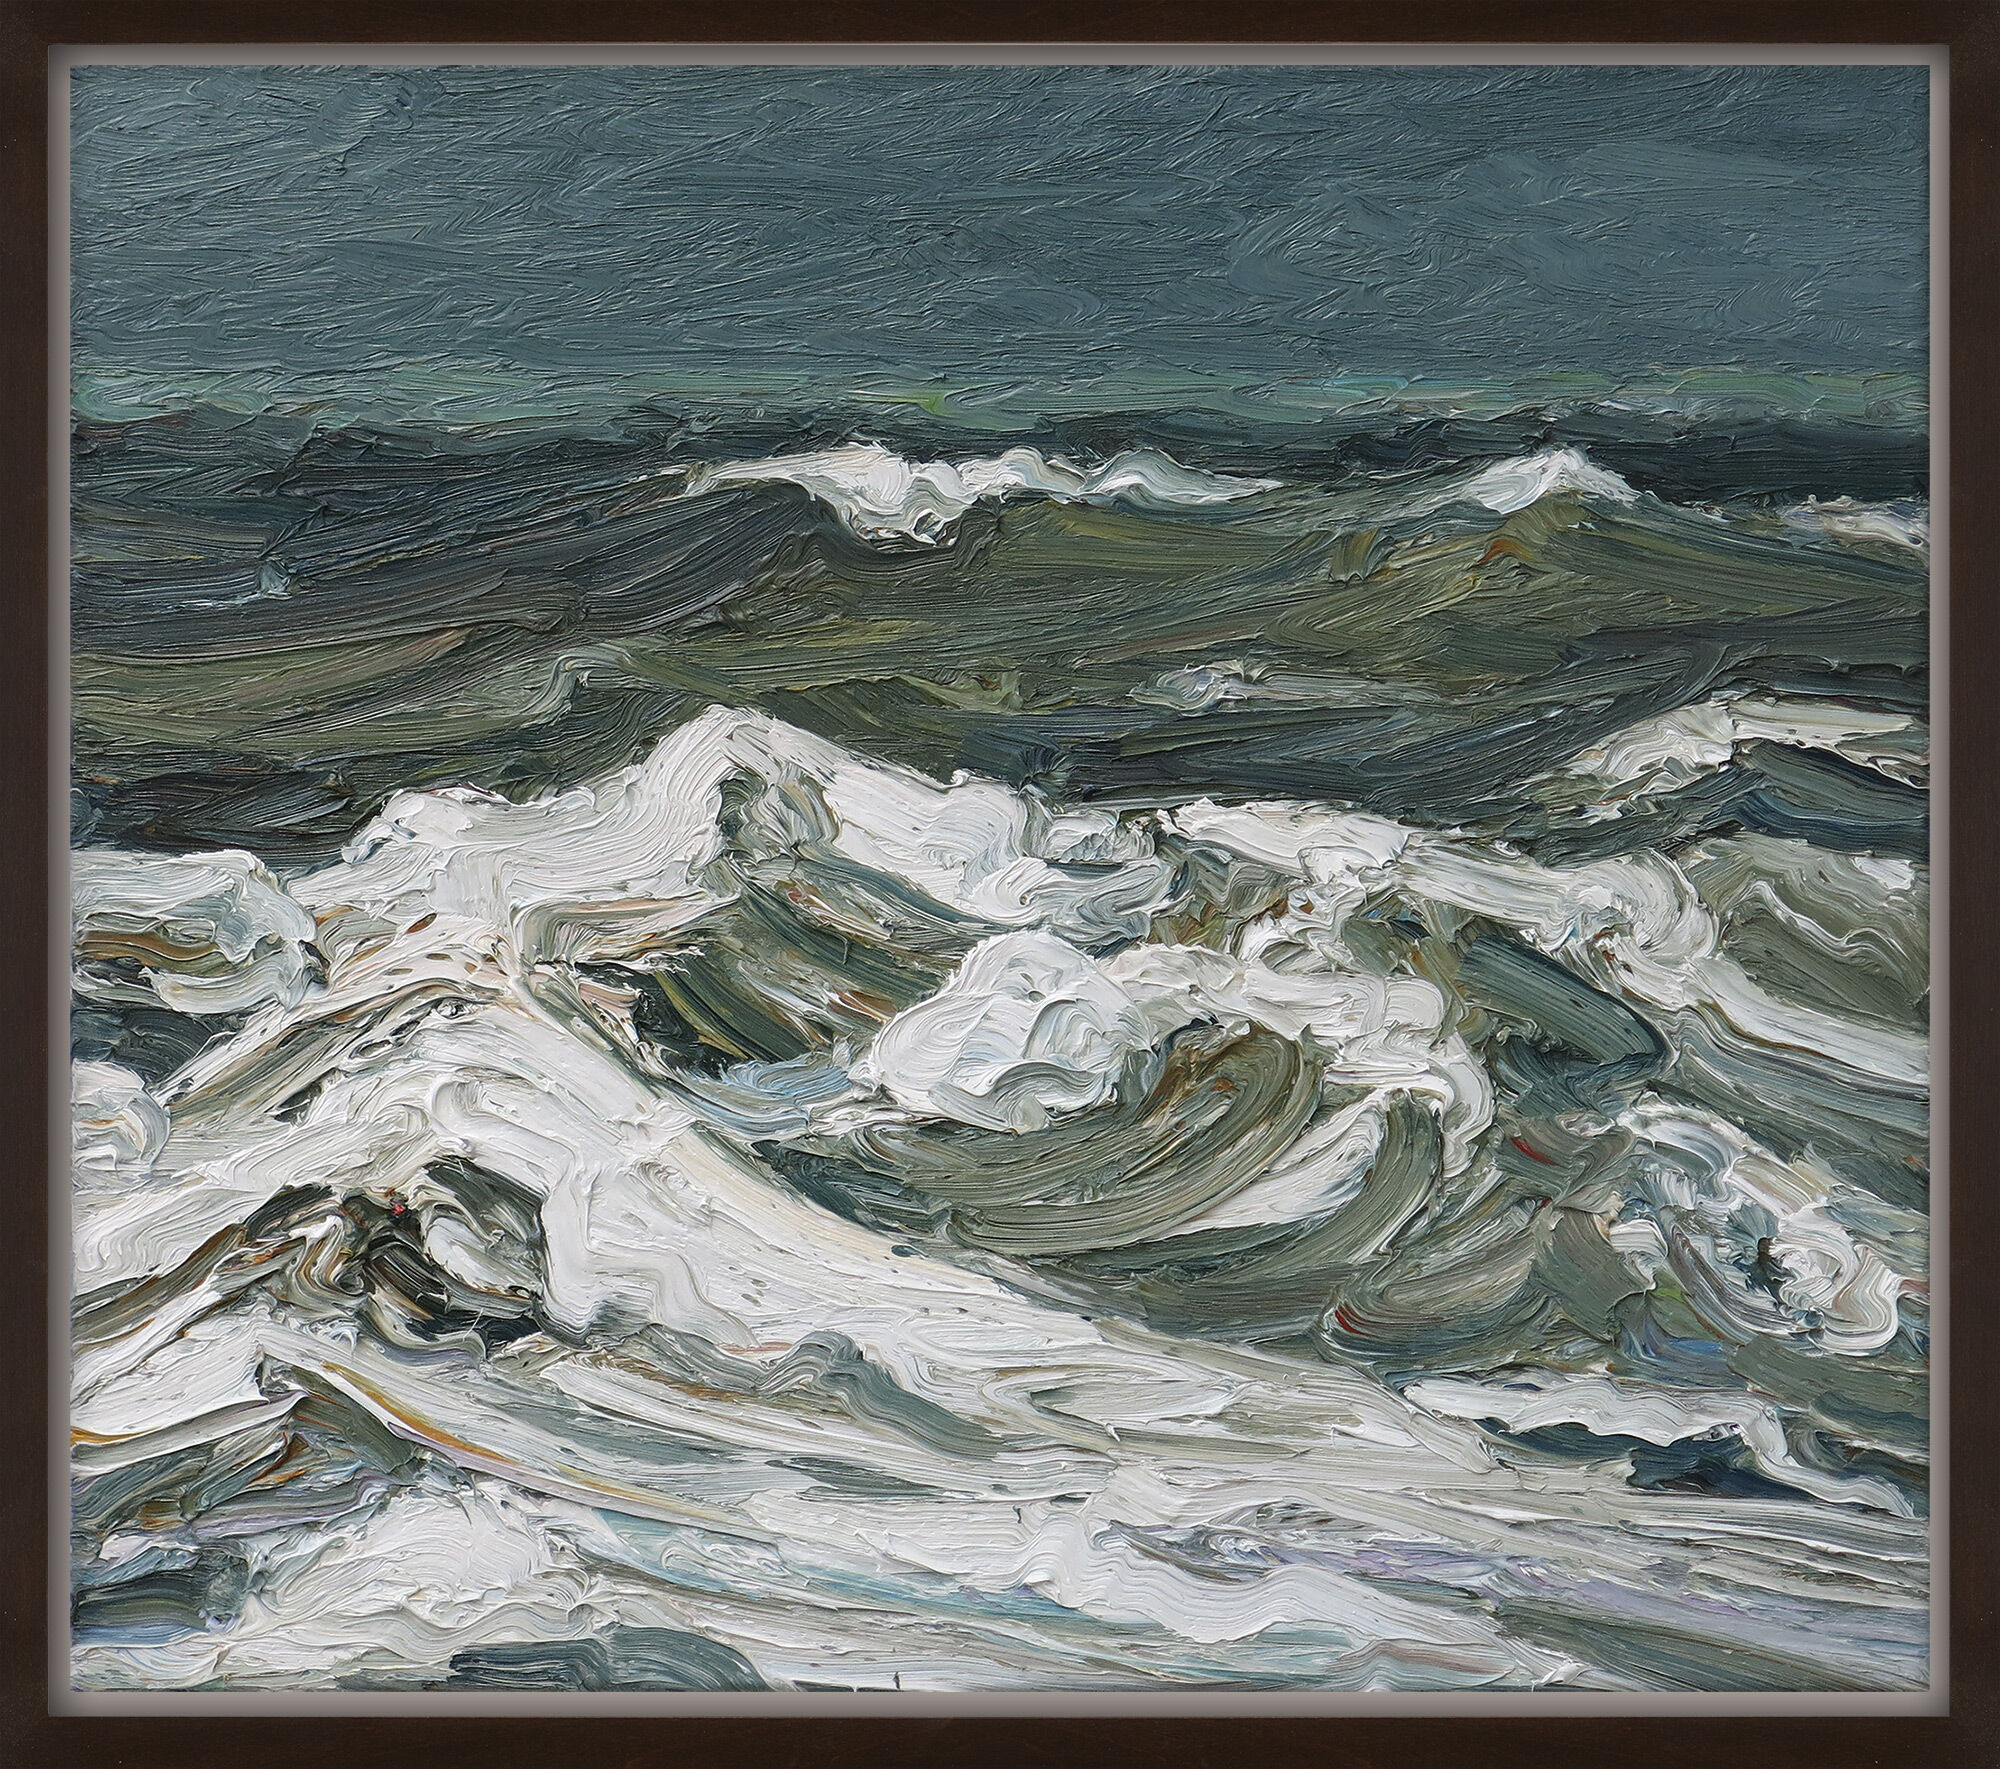 Picture "Rough Sea 19.VII" (2020) by Ralph Fleck